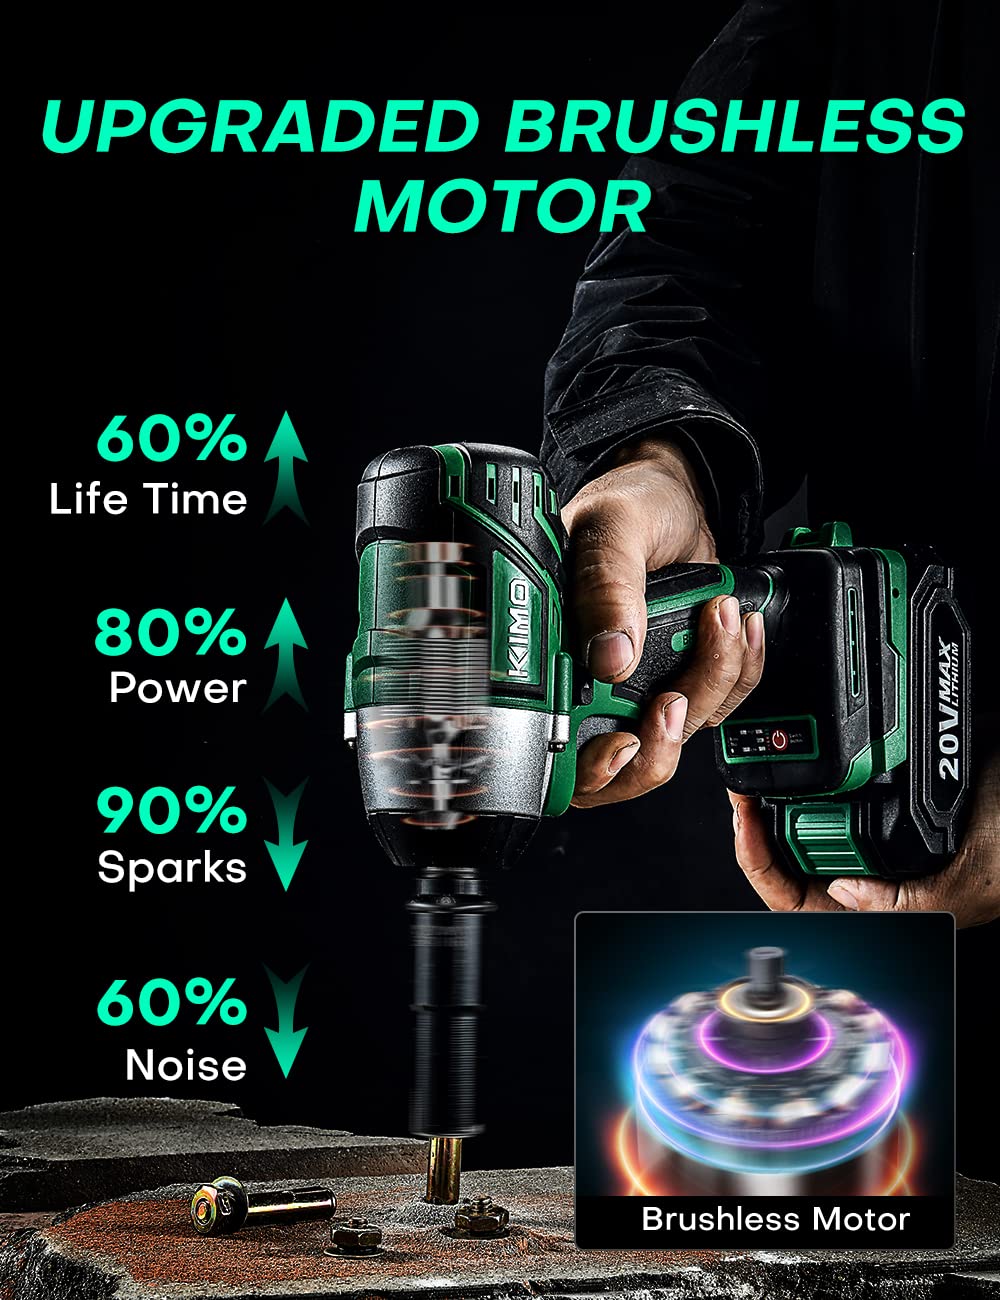 KIMO Cordless Impact Wrench 1/2 Inch, Impact Wrench Kit w/Premium Brake Stop, 7 Sockets, 1-Hour Fast Charger, 1/2 Impact Gun, Brushless High Torque Impact Driver with 260 ft-lbs (350N.m) & 3000 RPM